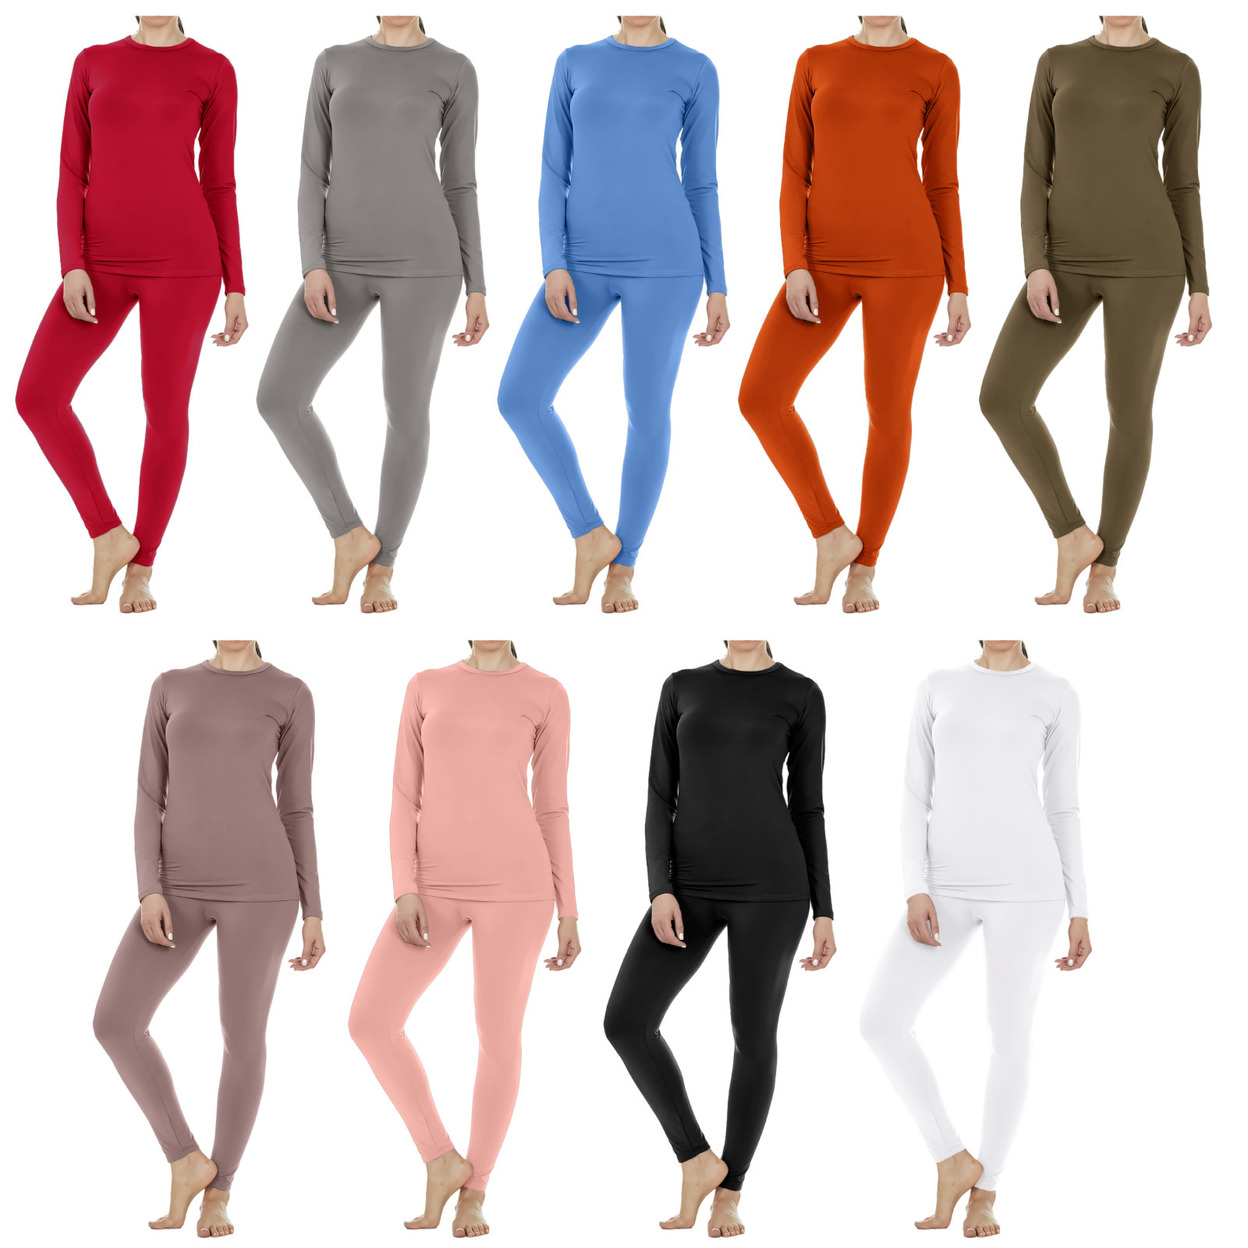 3-Sets: Women's Fleece Lined Winter Warm Soft Thermal Sets For Cold Weather - Large